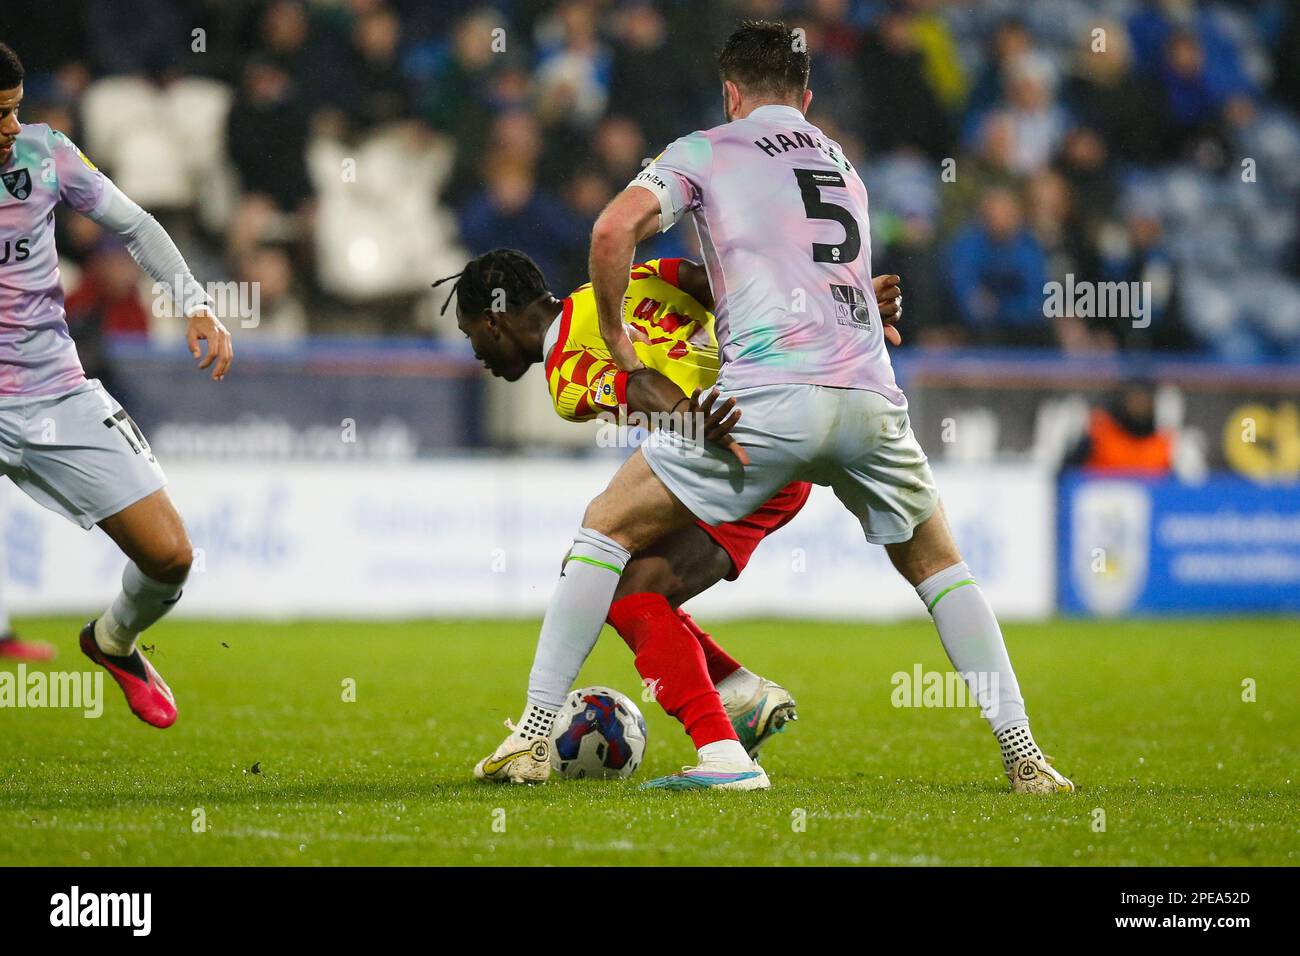 Huddersfield, UK. 15th Mar, 2023. Brahima Diarra #35 of Huddersfield Town and Grant Hanley #5 of Norwich City during the Sky Bet Championship match Huddersfield Town vs Norwich City at John Smith's Stadium, Huddersfield, United Kingdom, 15th March 2023 (Photo by Ben Early/News Images) Credit: News Images LTD/Alamy Live News Stock Photo